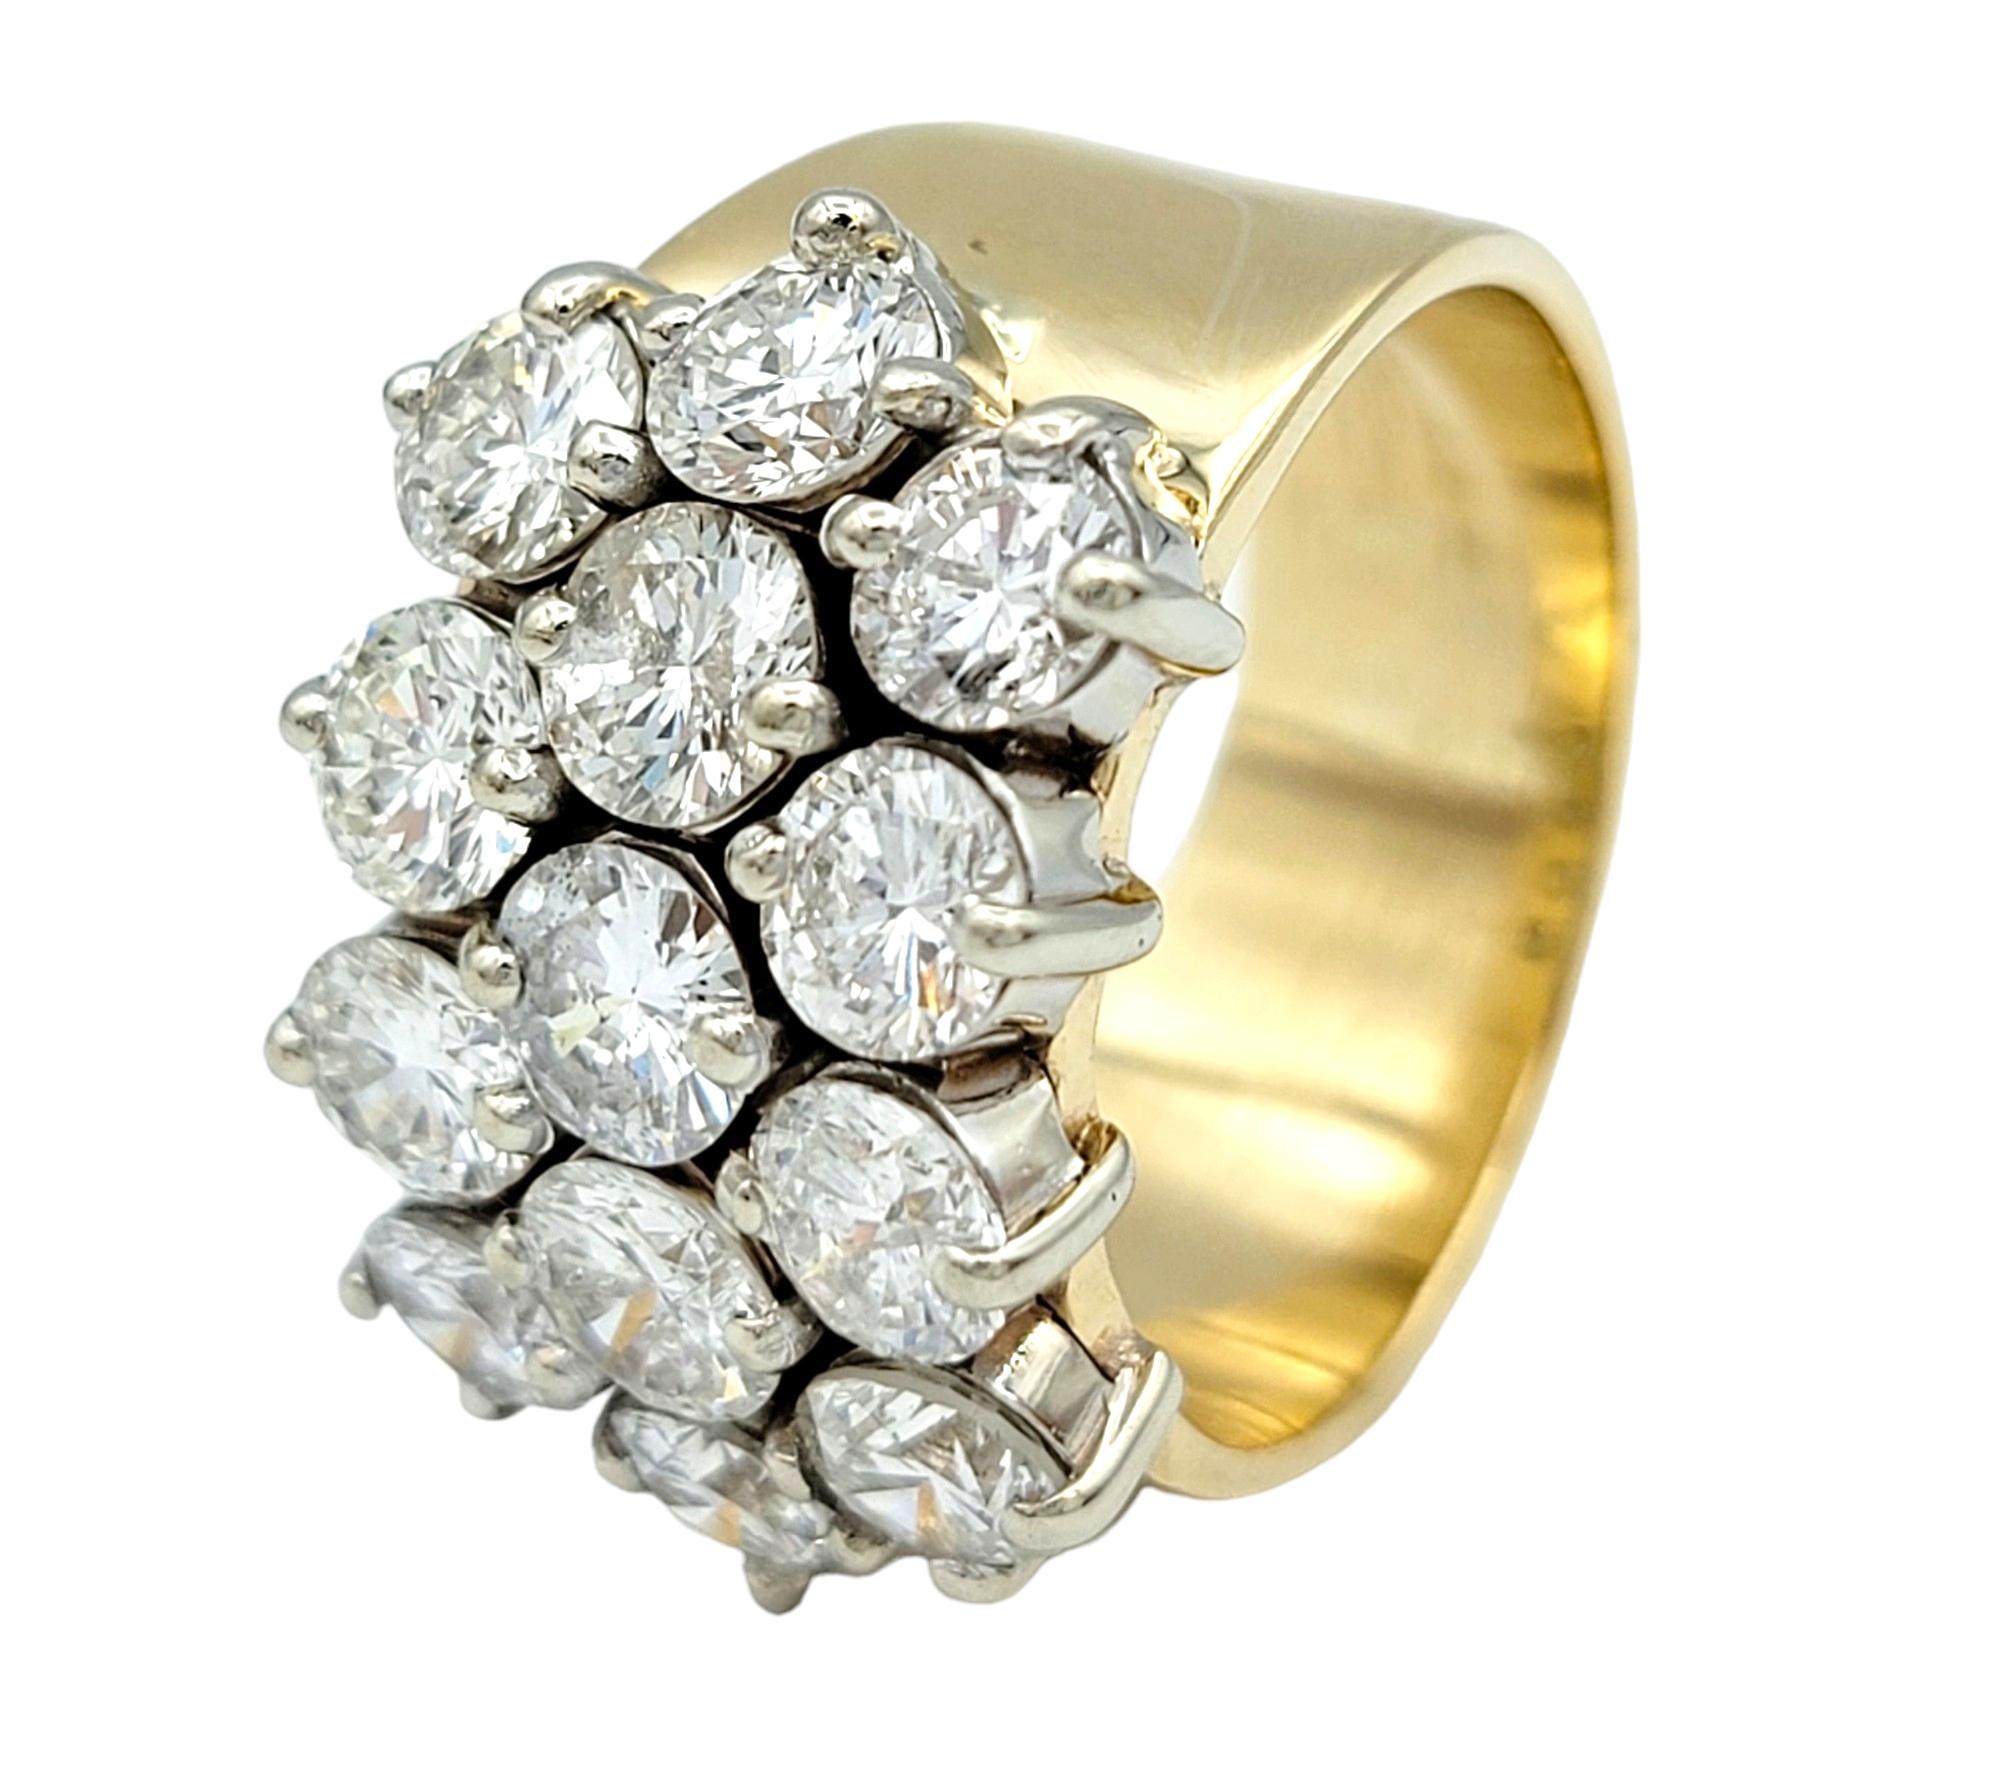 4.36 Carat Total Round Diamond Multi-Row Wide Band Ring in 14 Karat Yellow Gold  In Good Condition For Sale In Scottsdale, AZ